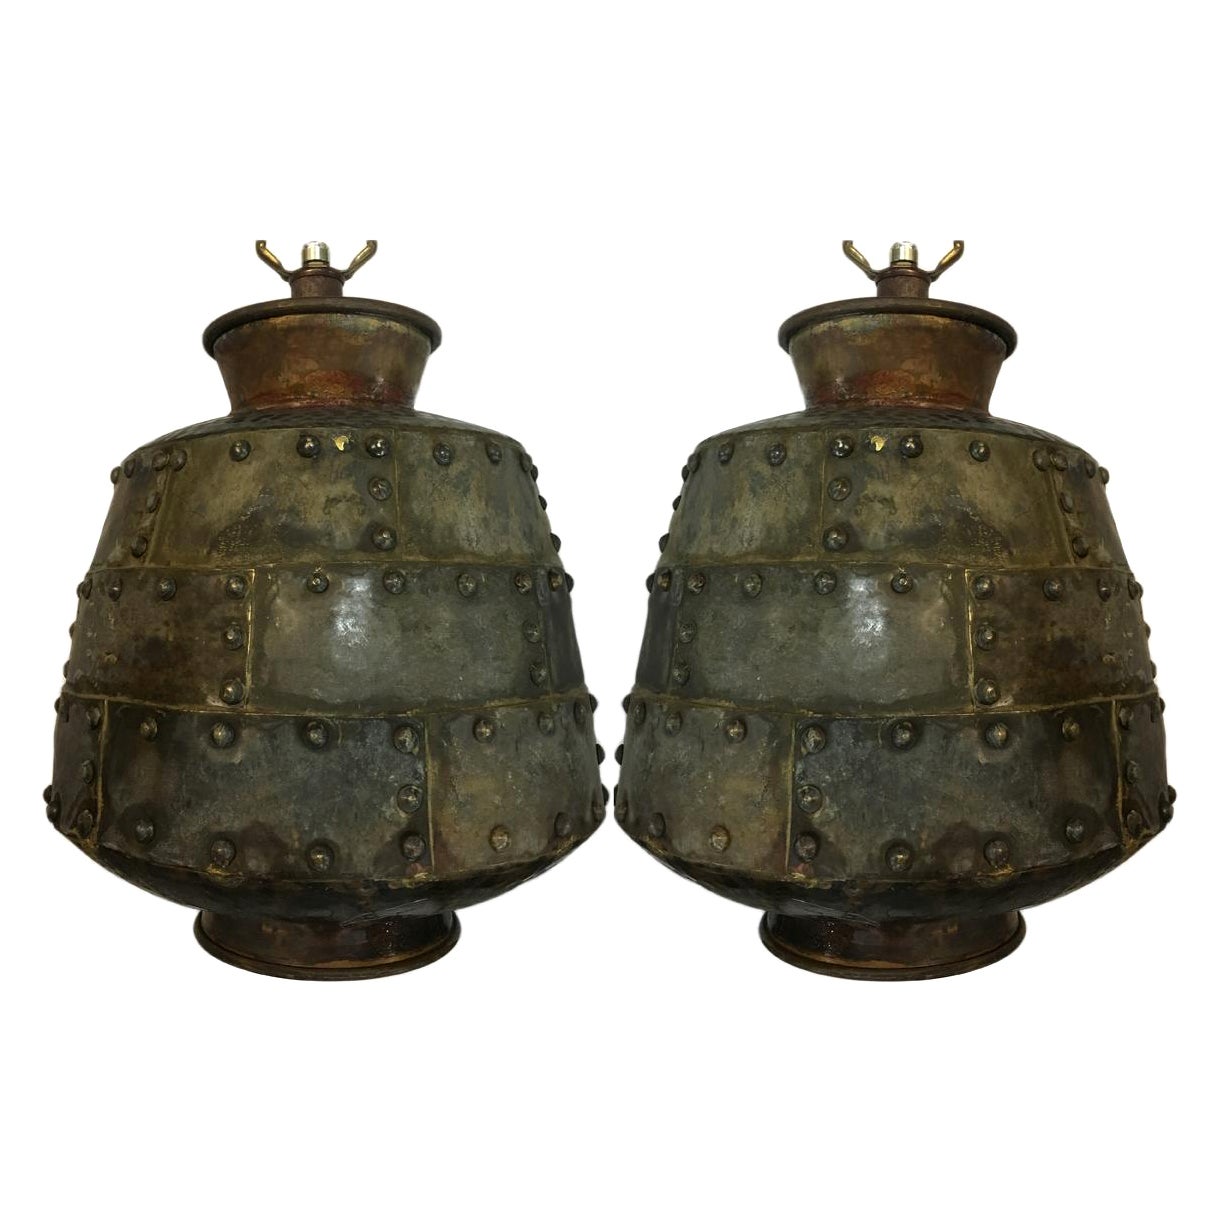 Pair of Mixed Metal Hammered Table Lamps